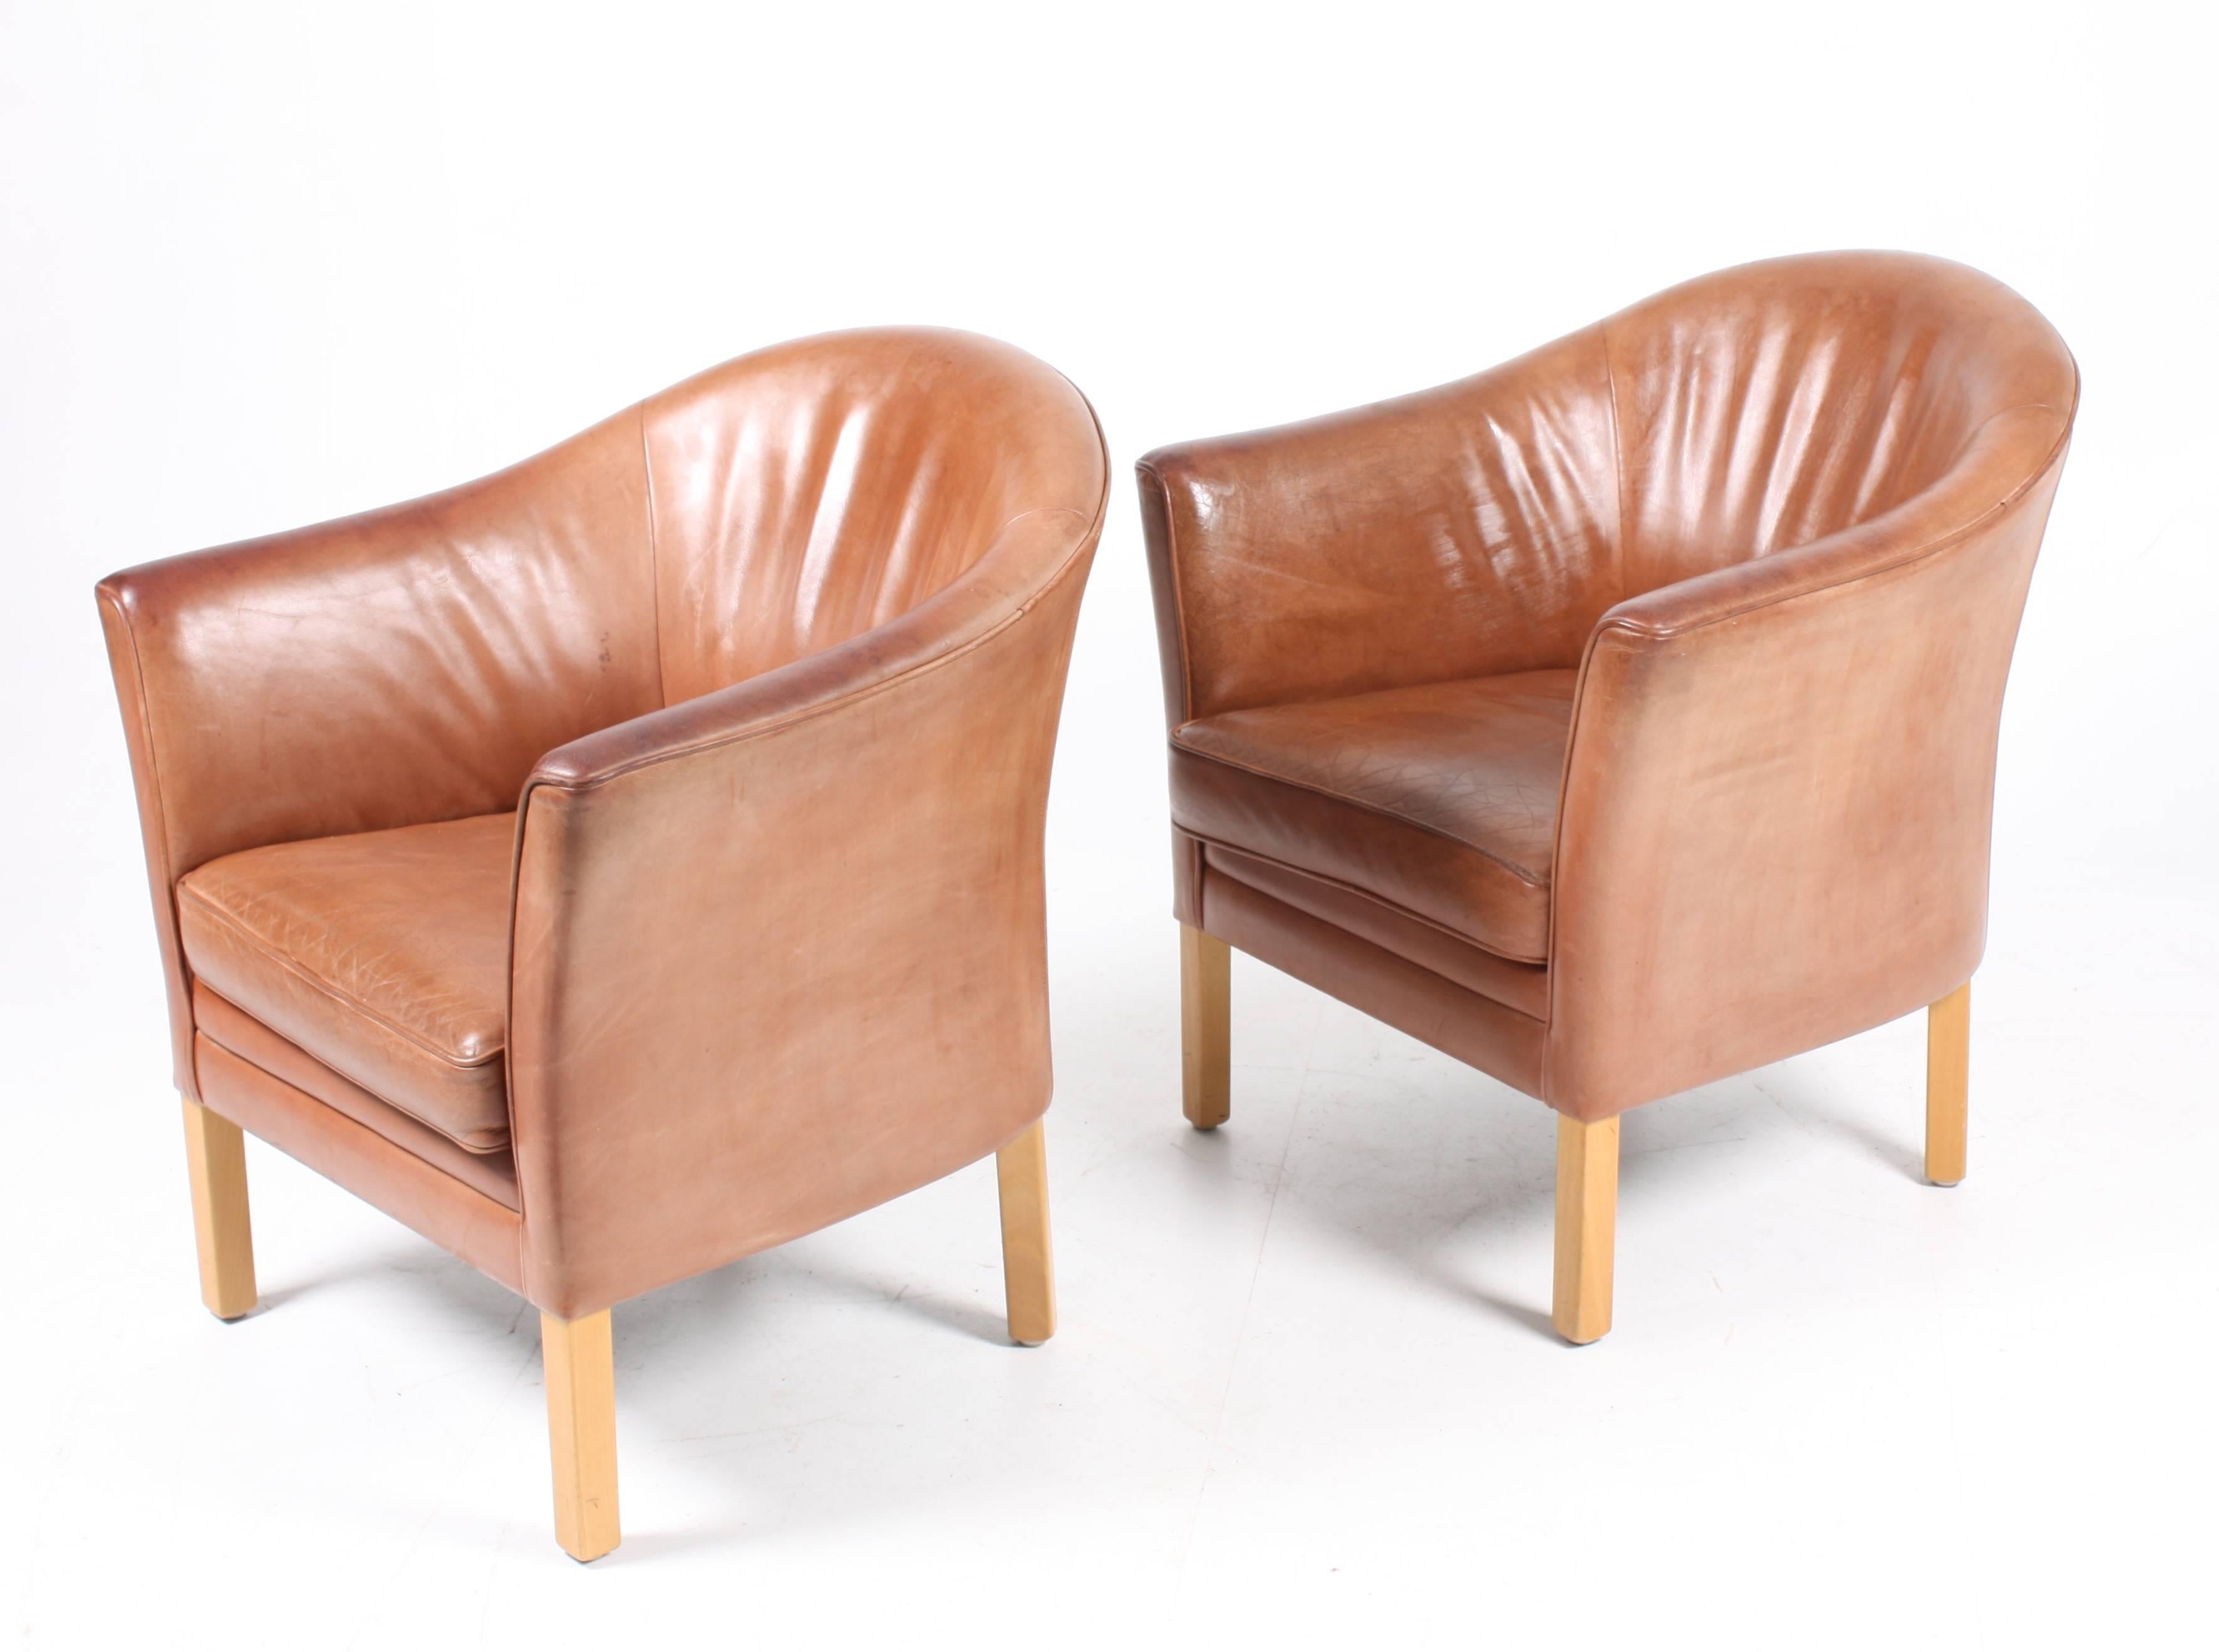 Pair of great looking and very comfortable lounge chairs in beautifully patinated leather designed by Danish architect Morgens Hansen in the 1970s. Great original condition.